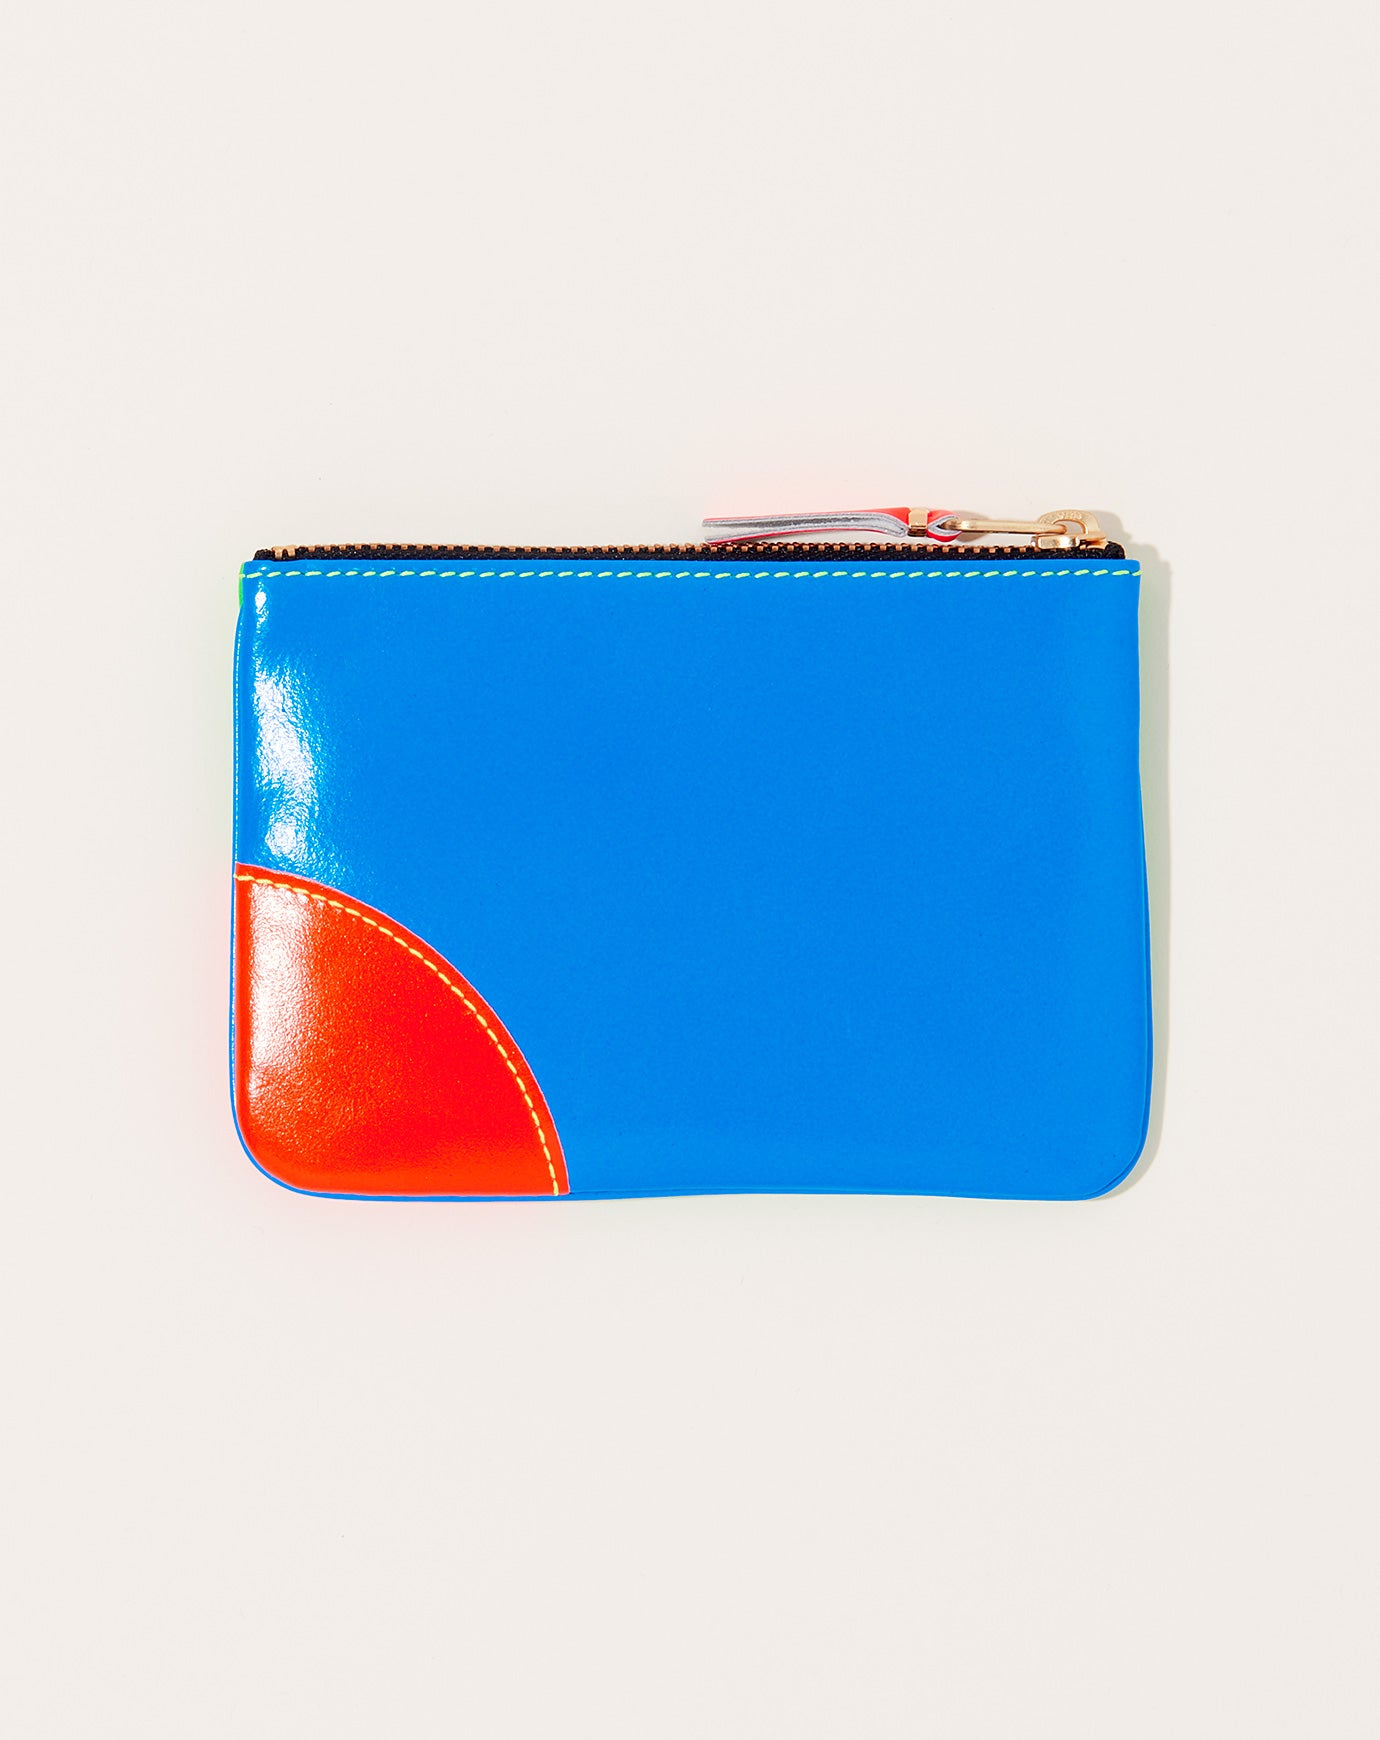 Comme des Garçons  Super Fluo Pouch in Green and Blue